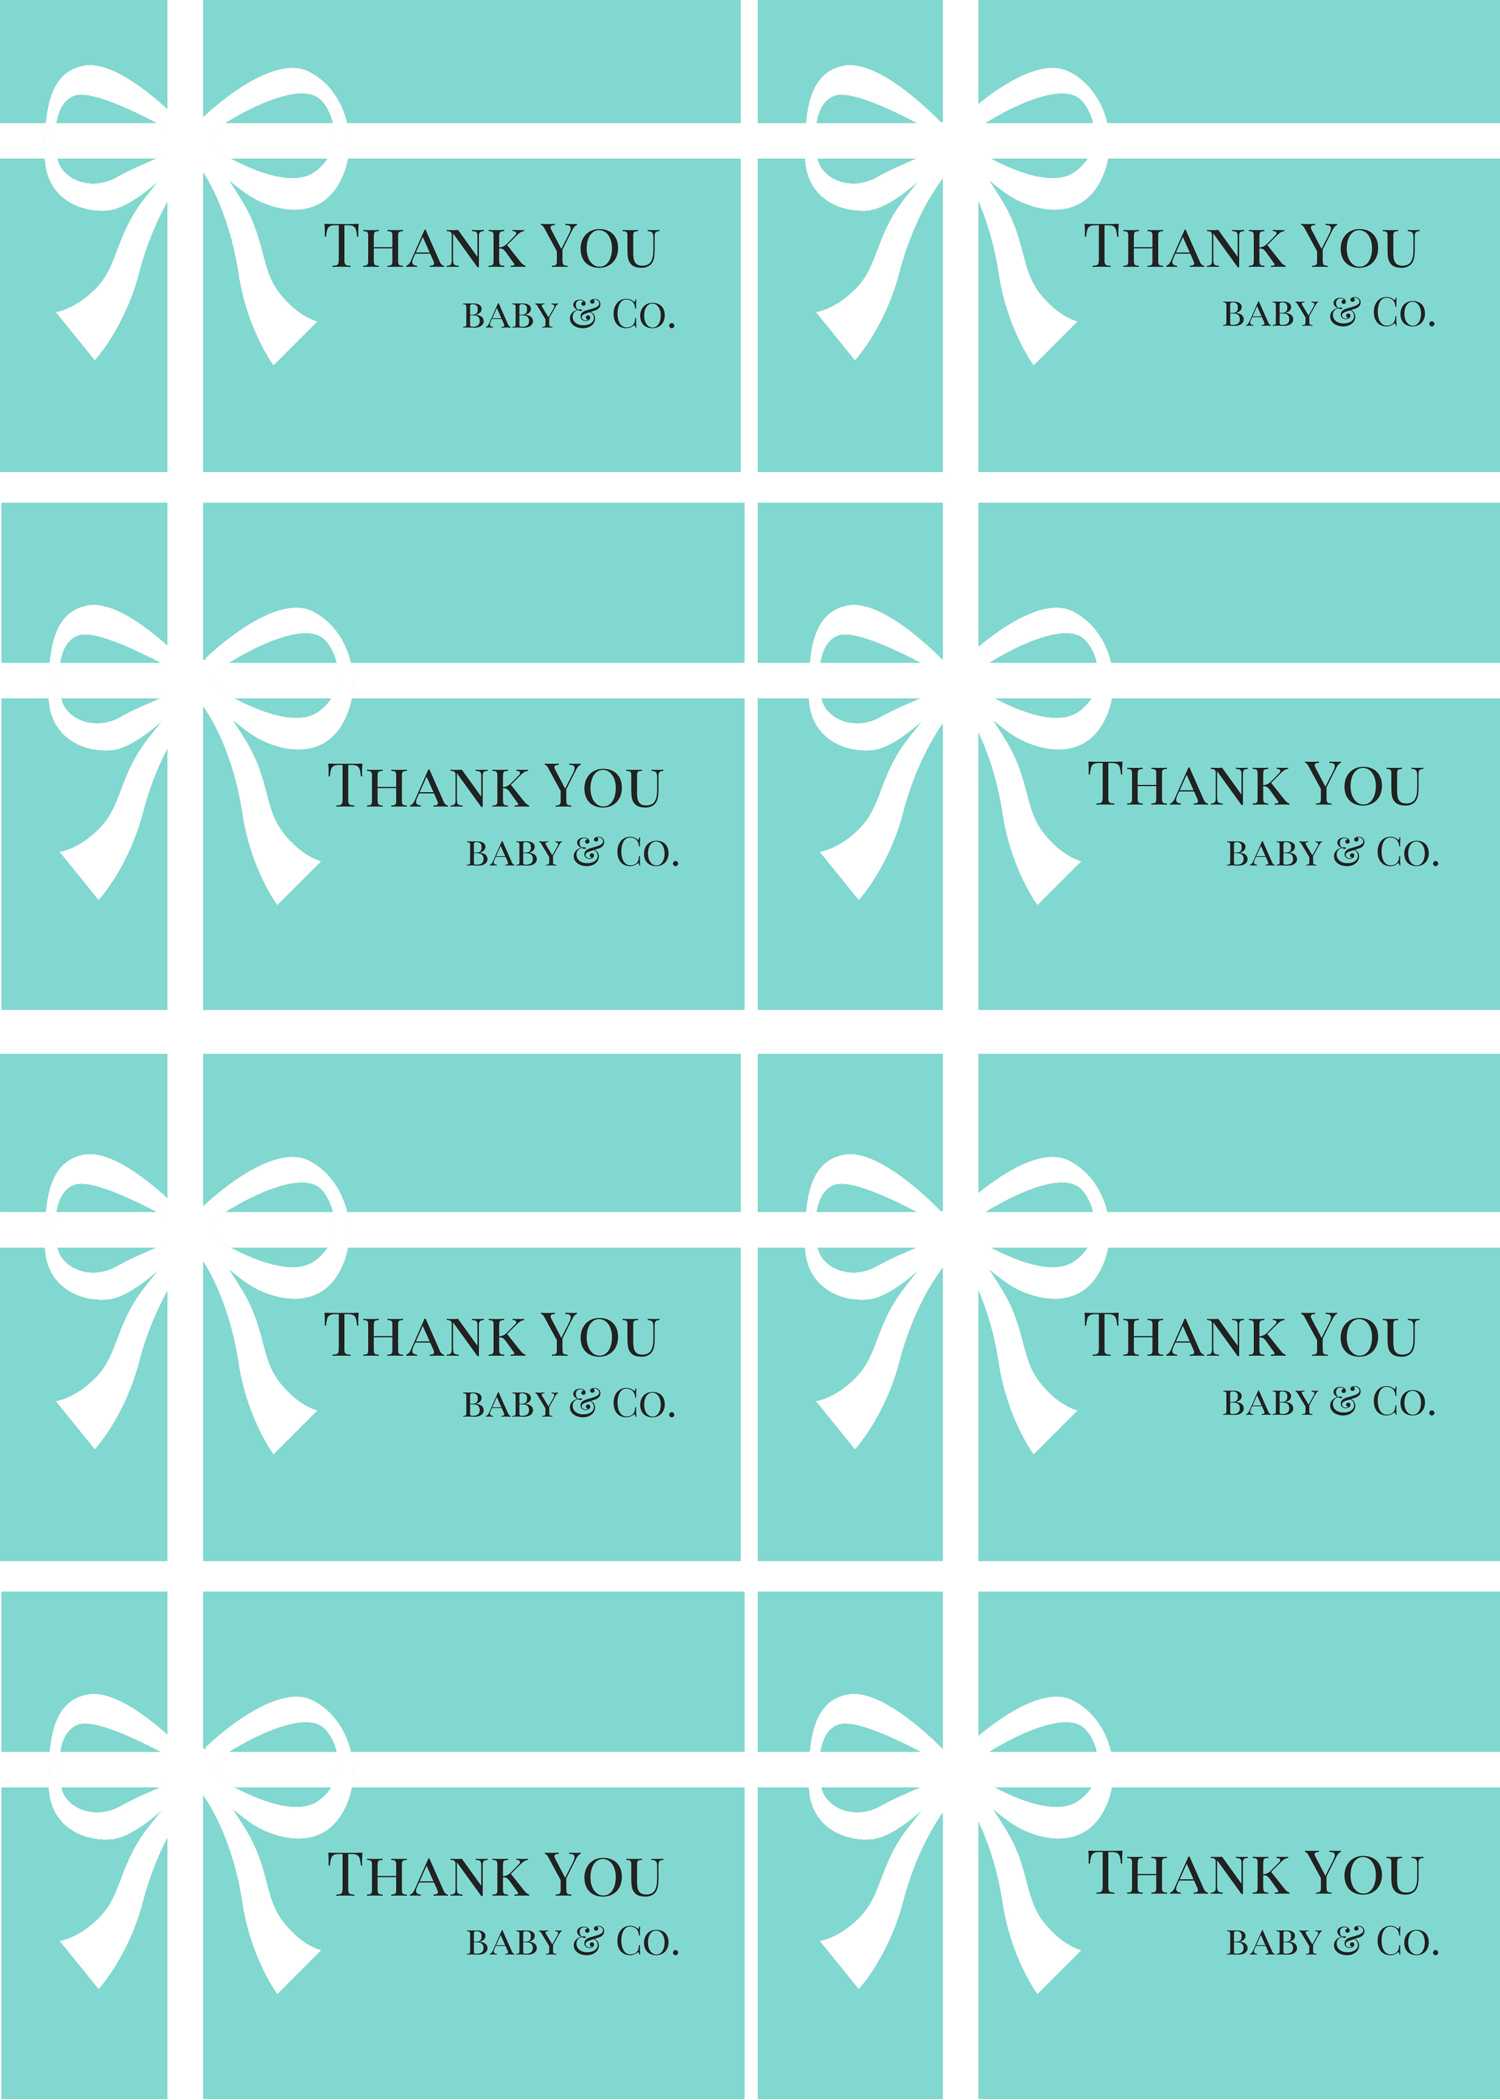 Free Printable Baby Shower Thank You Cards – Calep With Regard To Thank You Card Template For Baby Shower